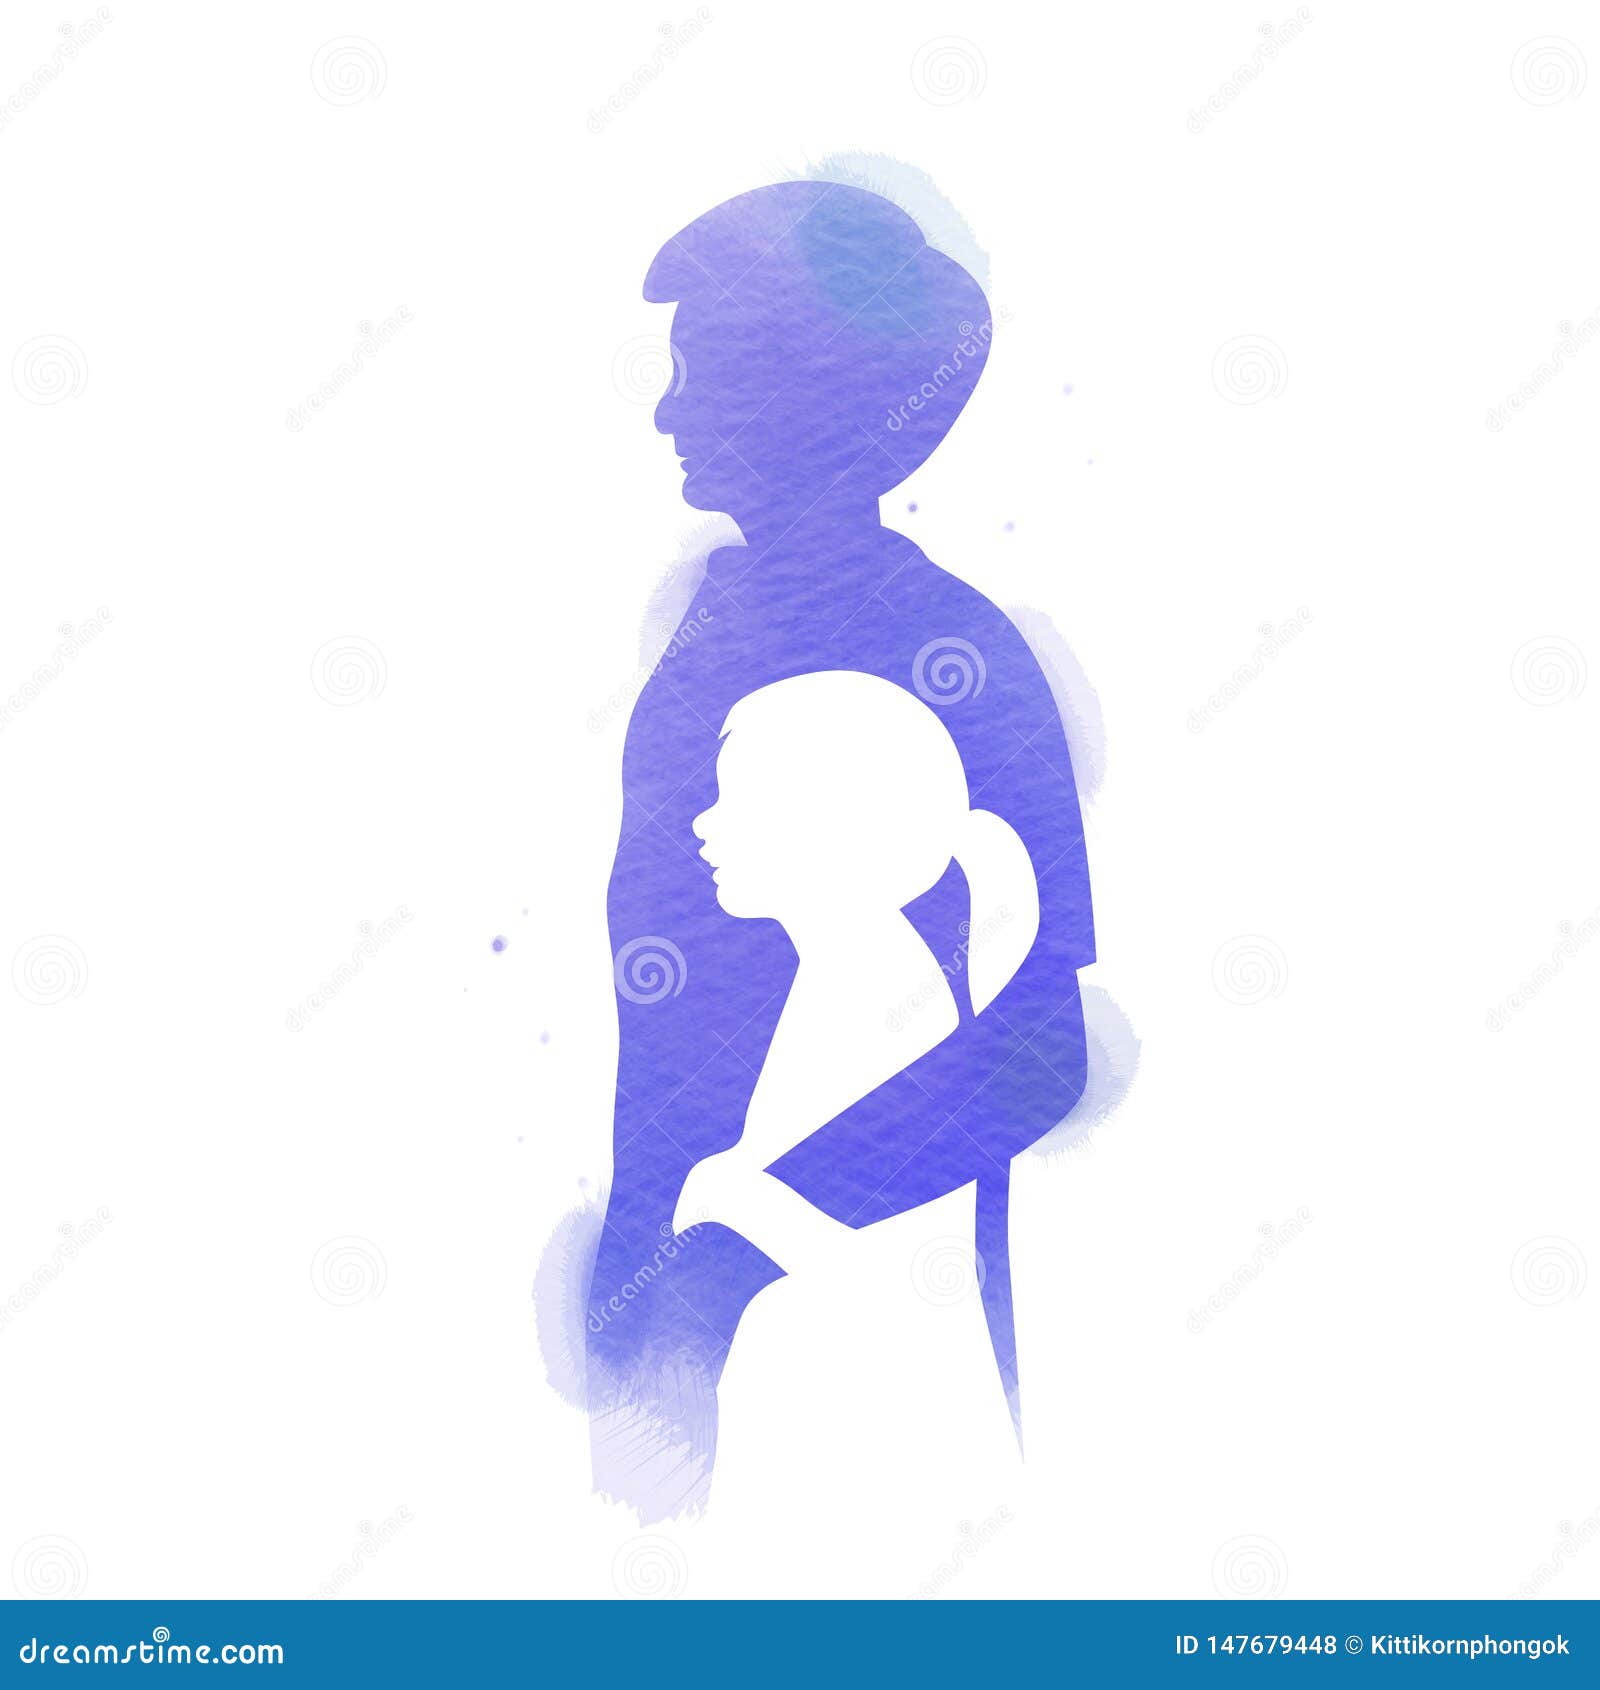 Father and Daughter Sketch Vector Images (over 1,300)-saigonsouth.com.vn